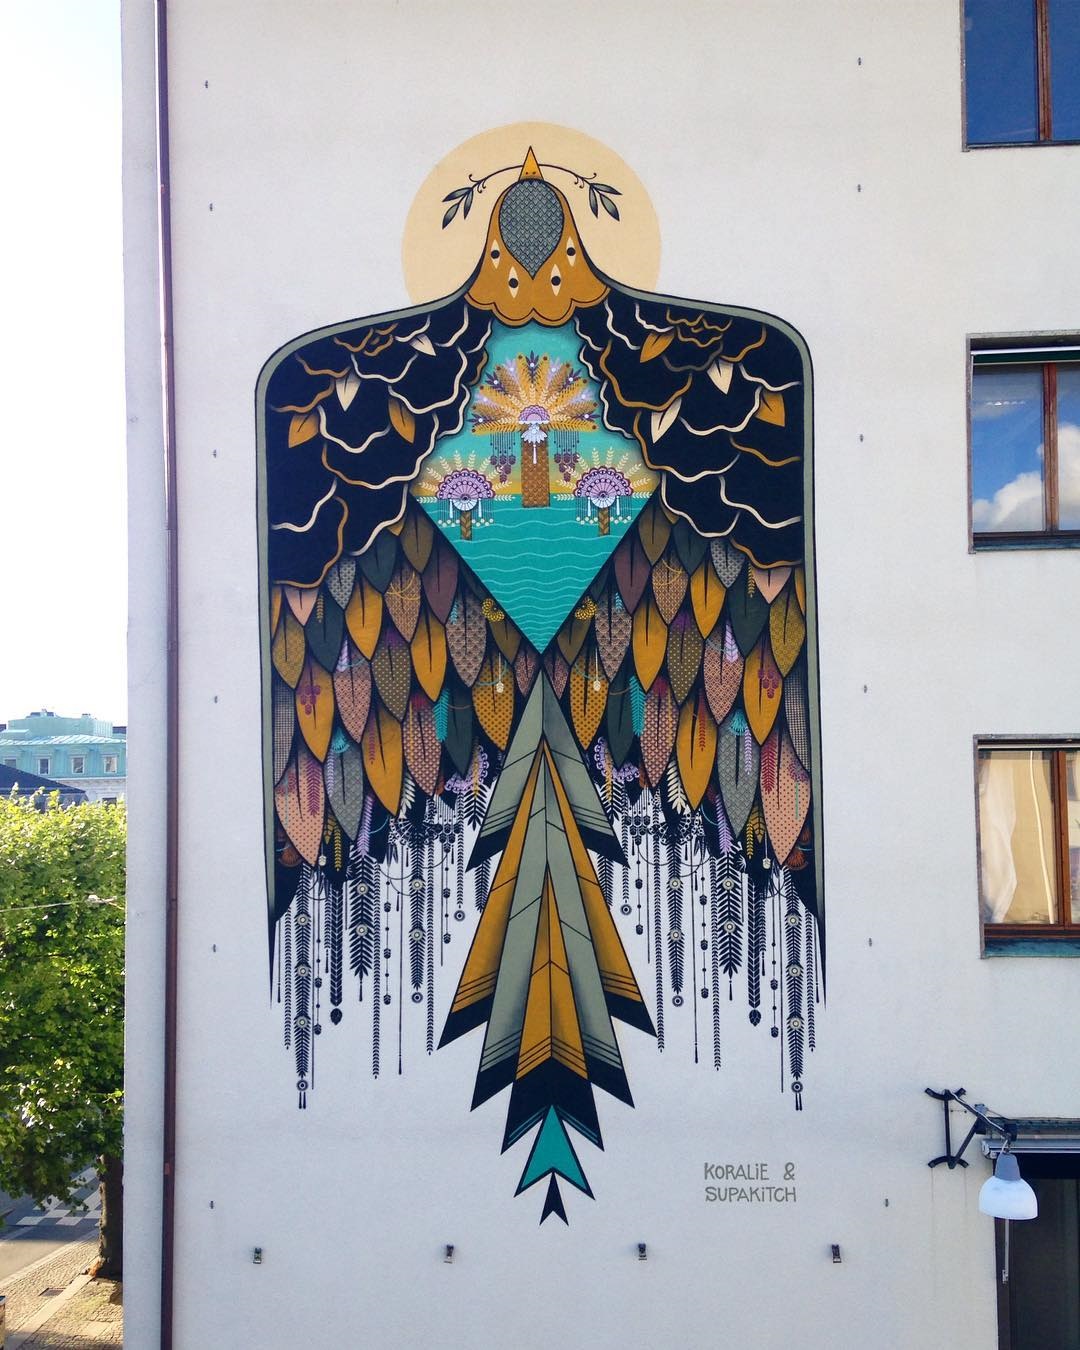 Koralie S Intricate Vibrant Murals And Works On Hi